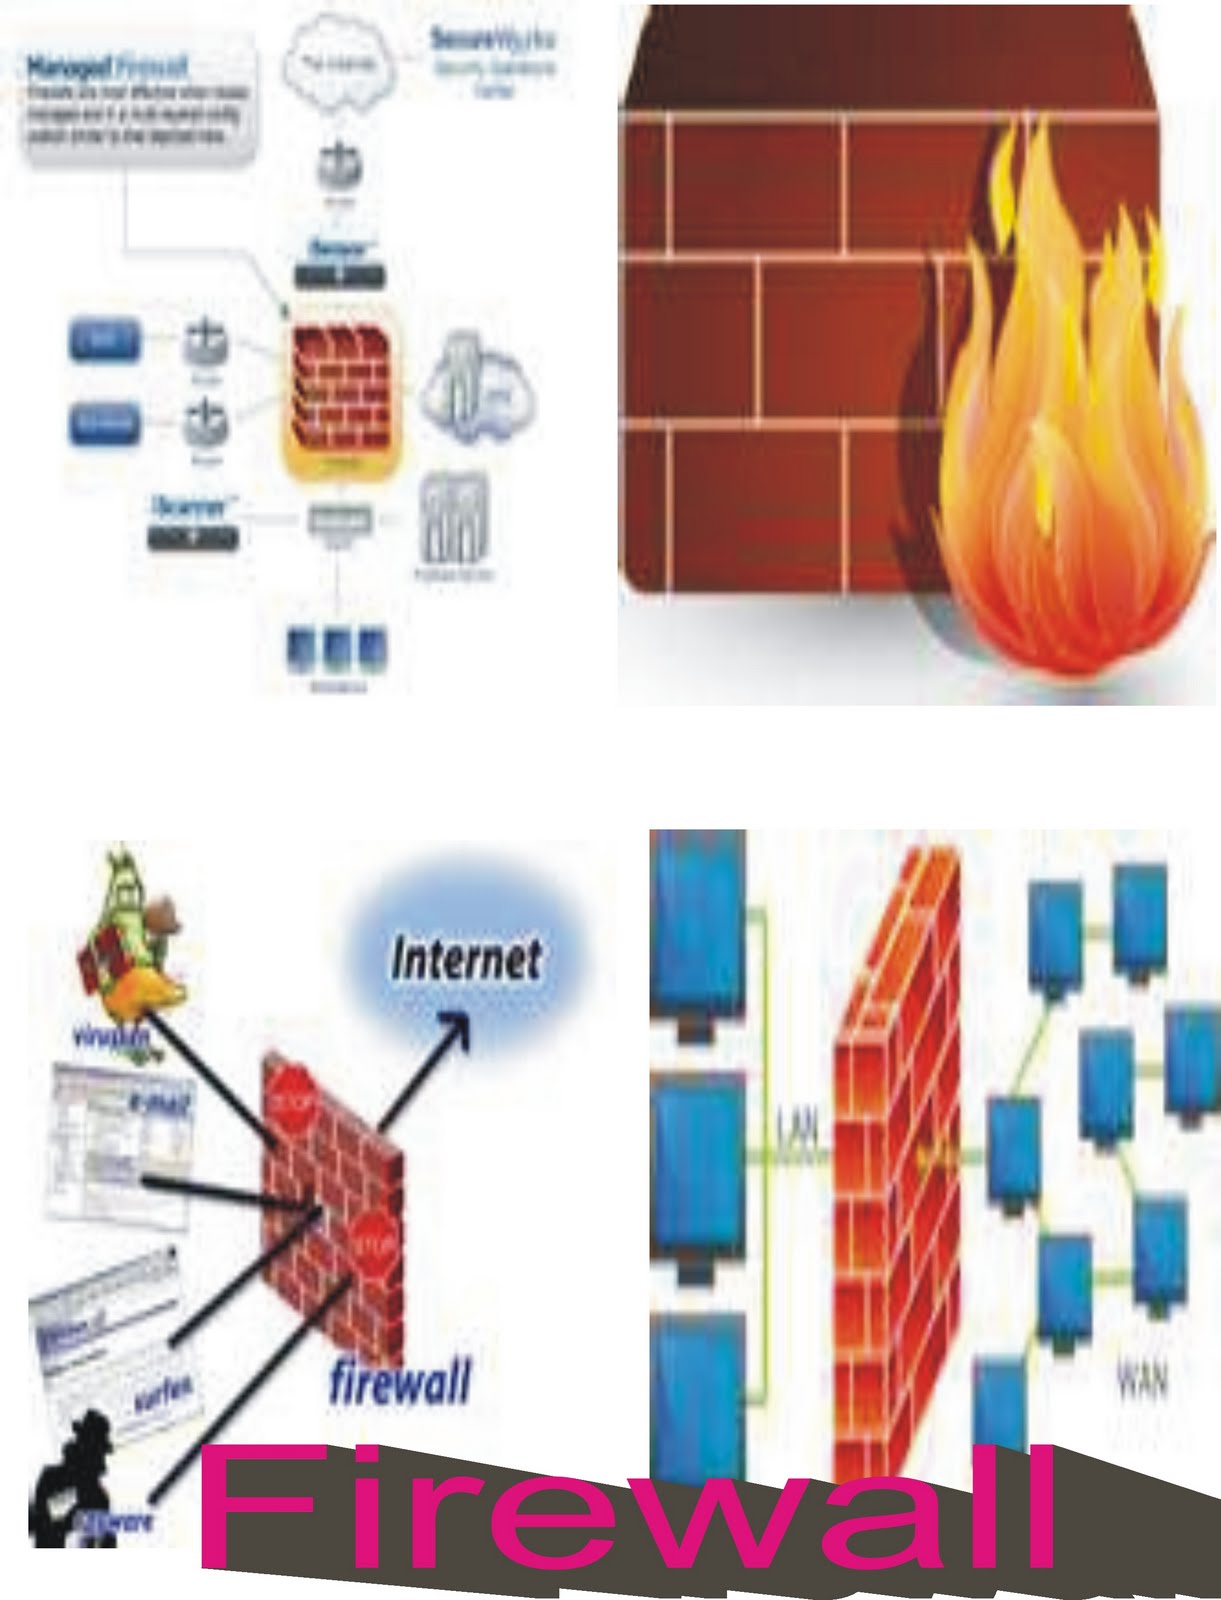 LAN (Local Area Network): Firewall is a term commonly used to refer to